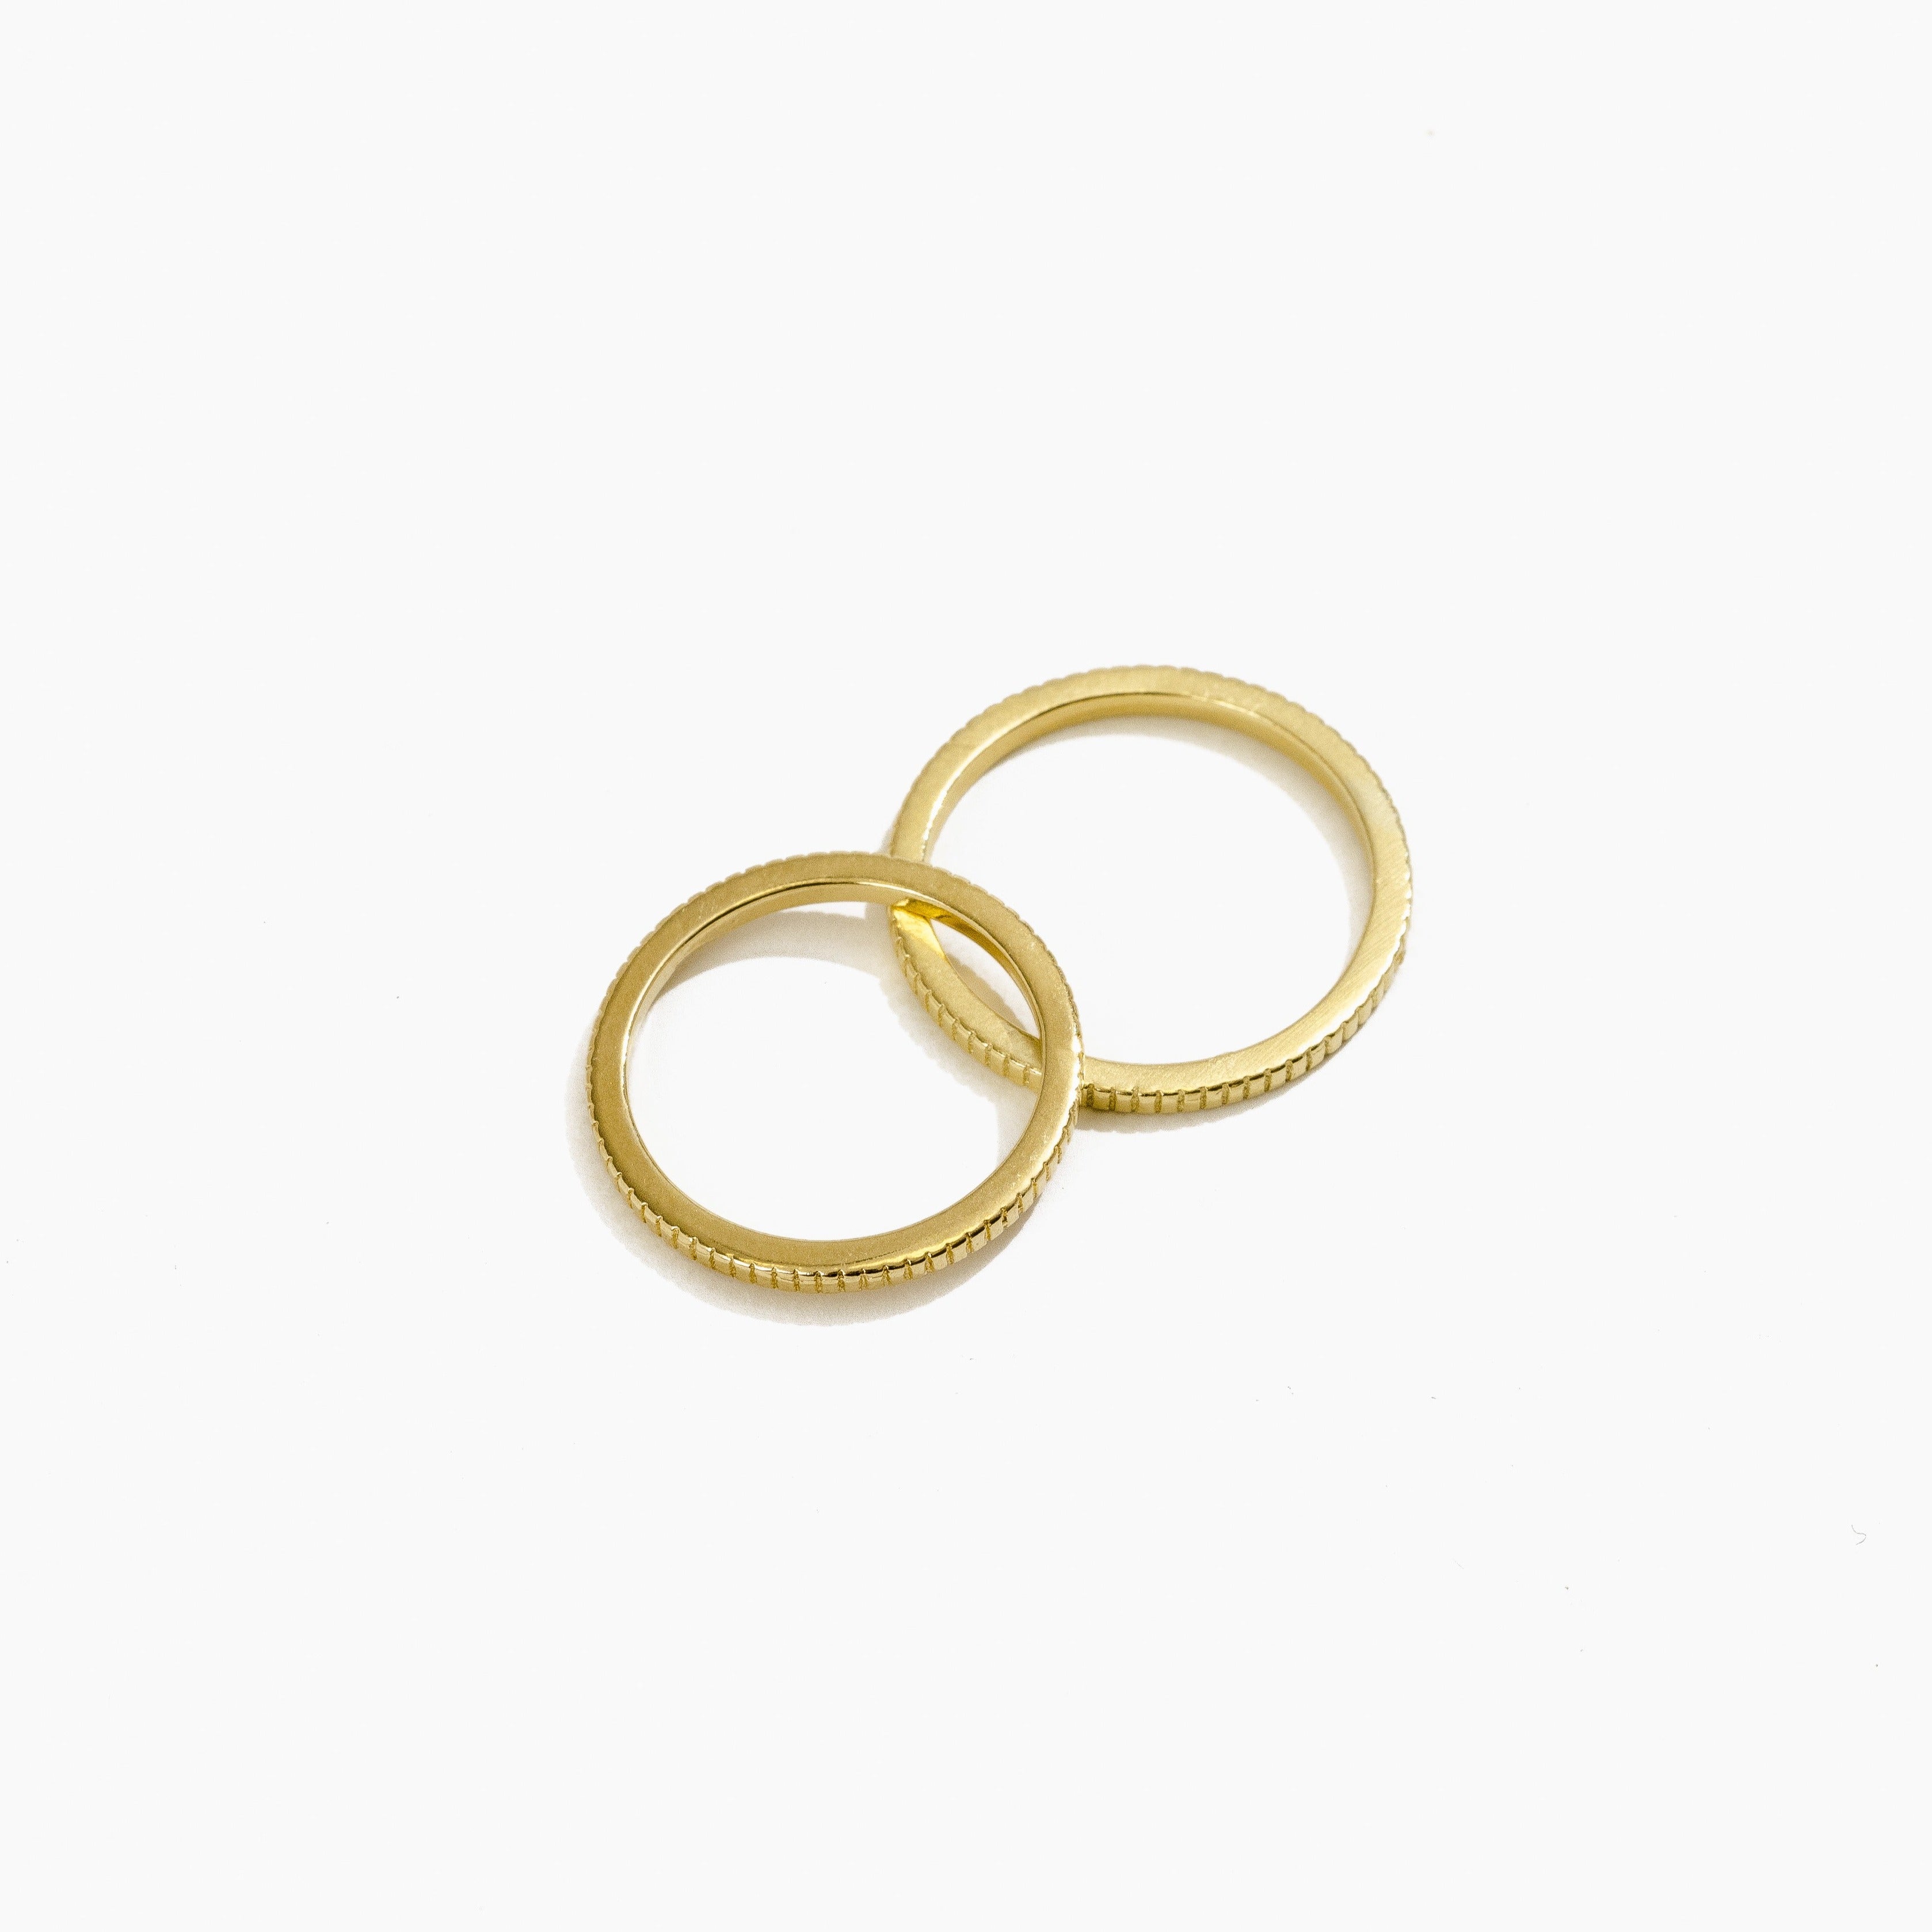 Coin Ring by Katie Dean Jewelry made in America